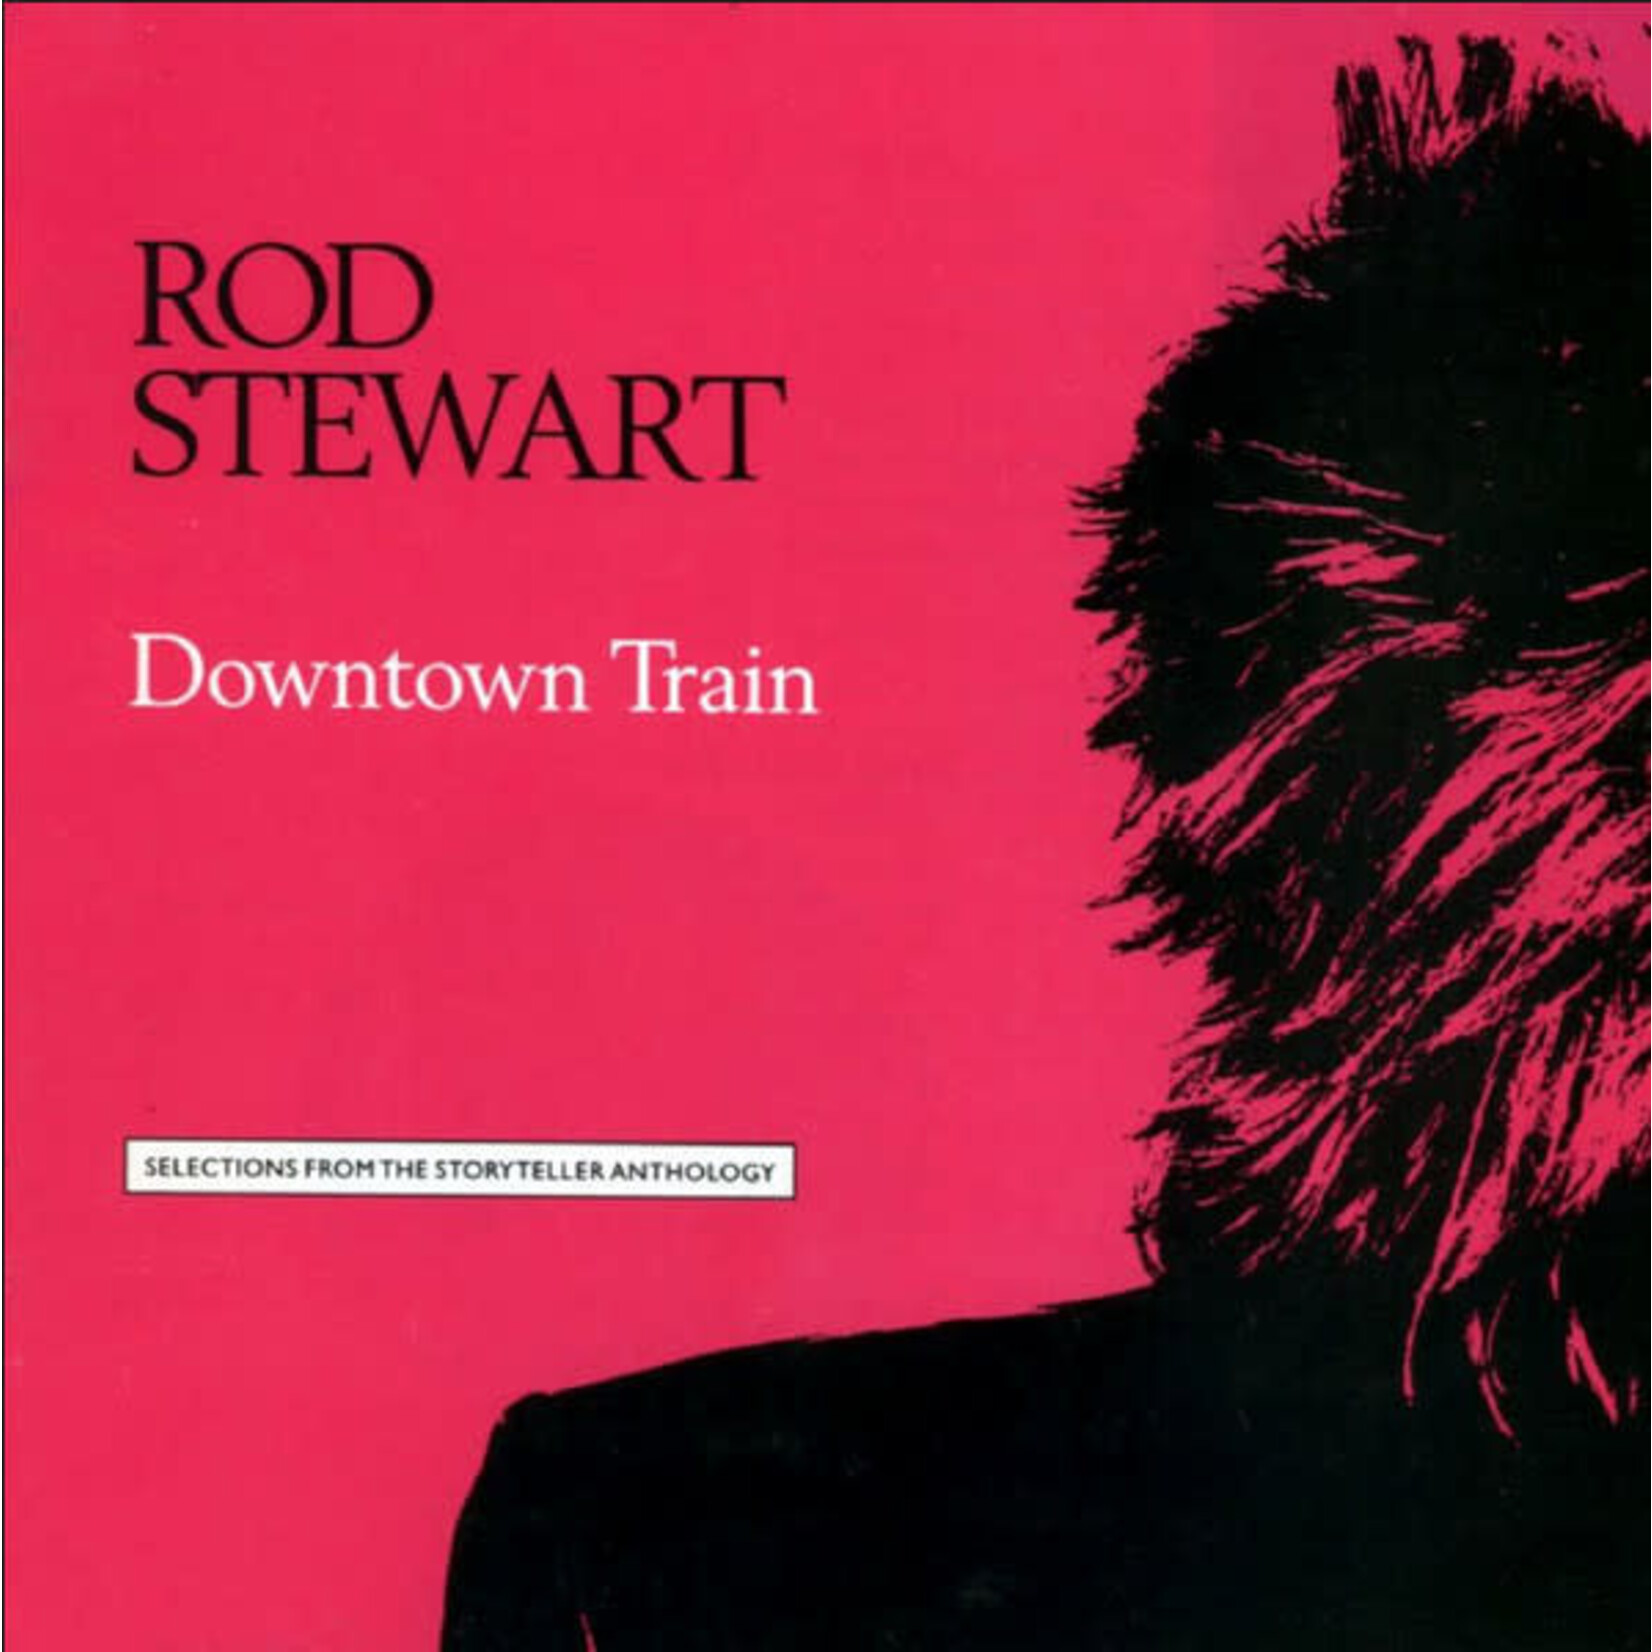 [Vintage] Rod Stewart - Downtown Train (Selections From The Storyteller Anthology)